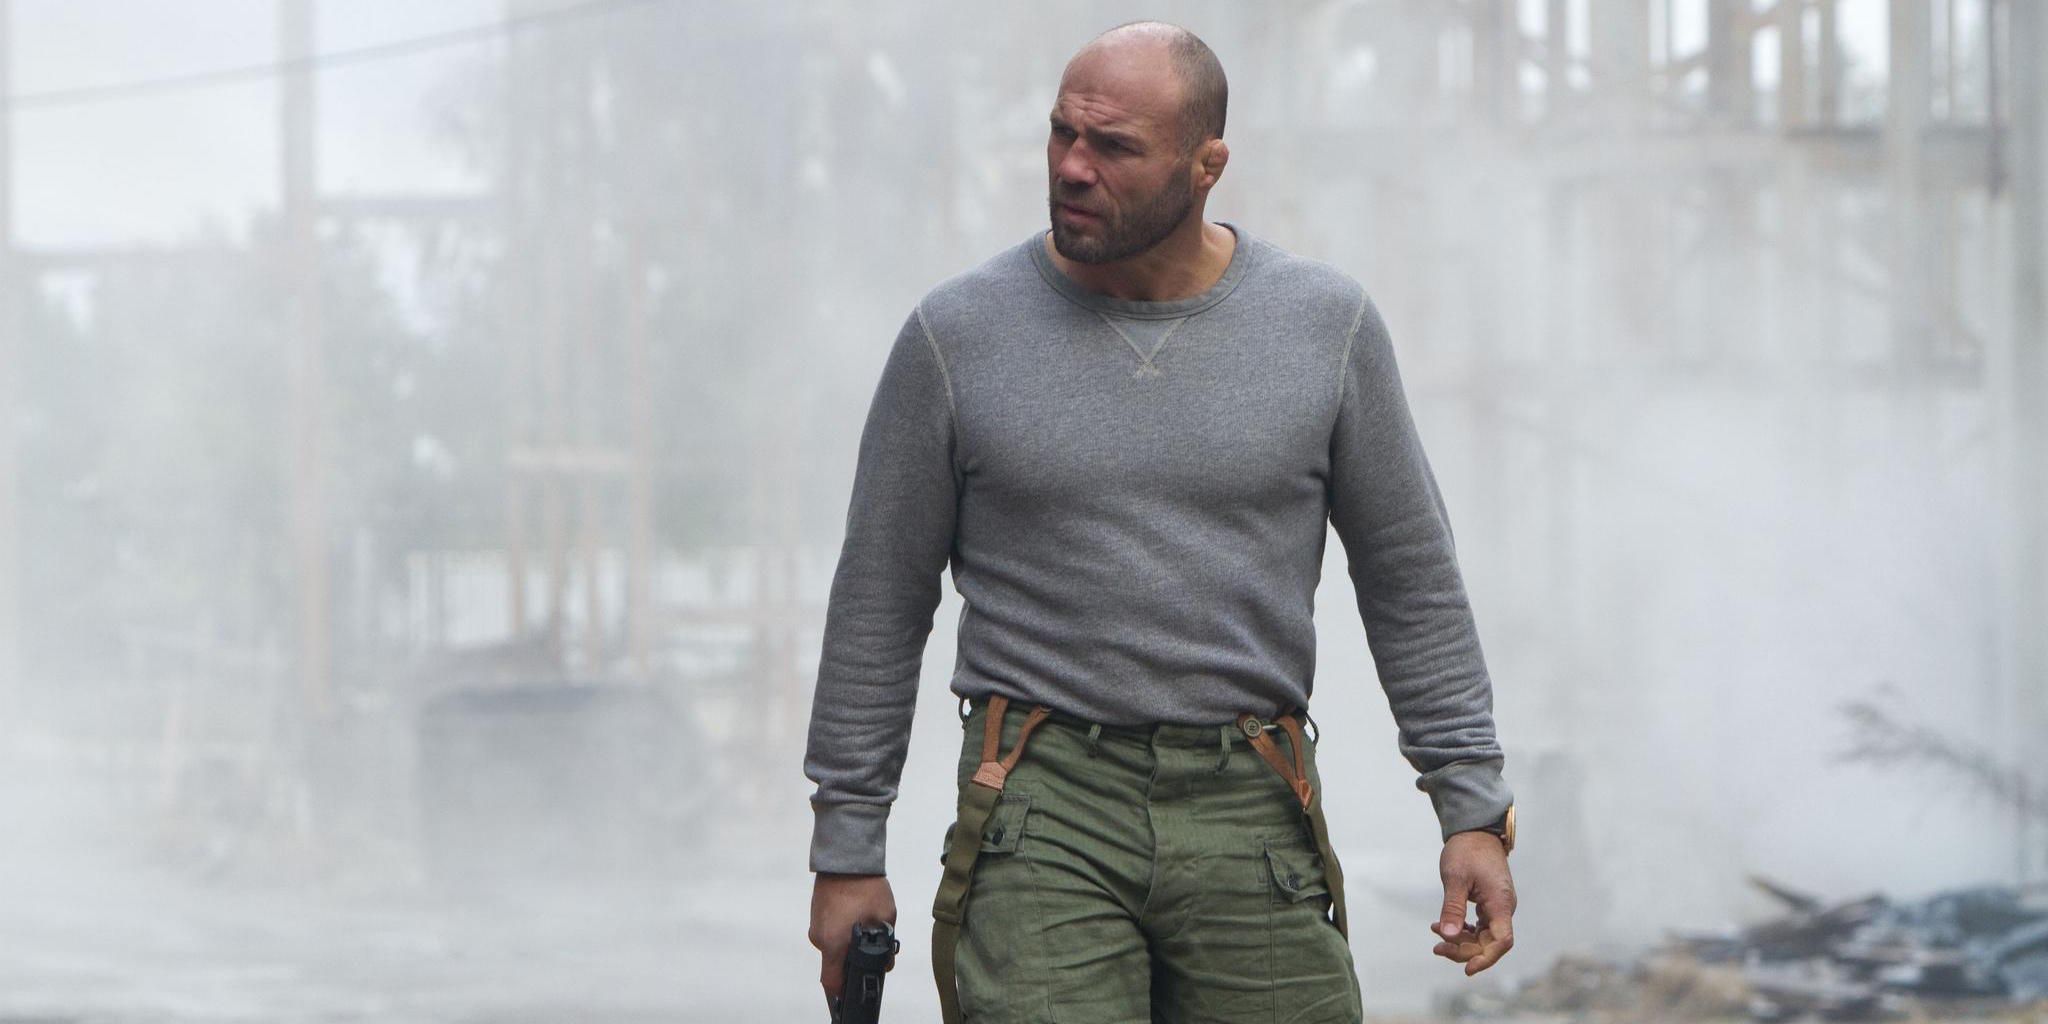 Randy Couture in The Expendables